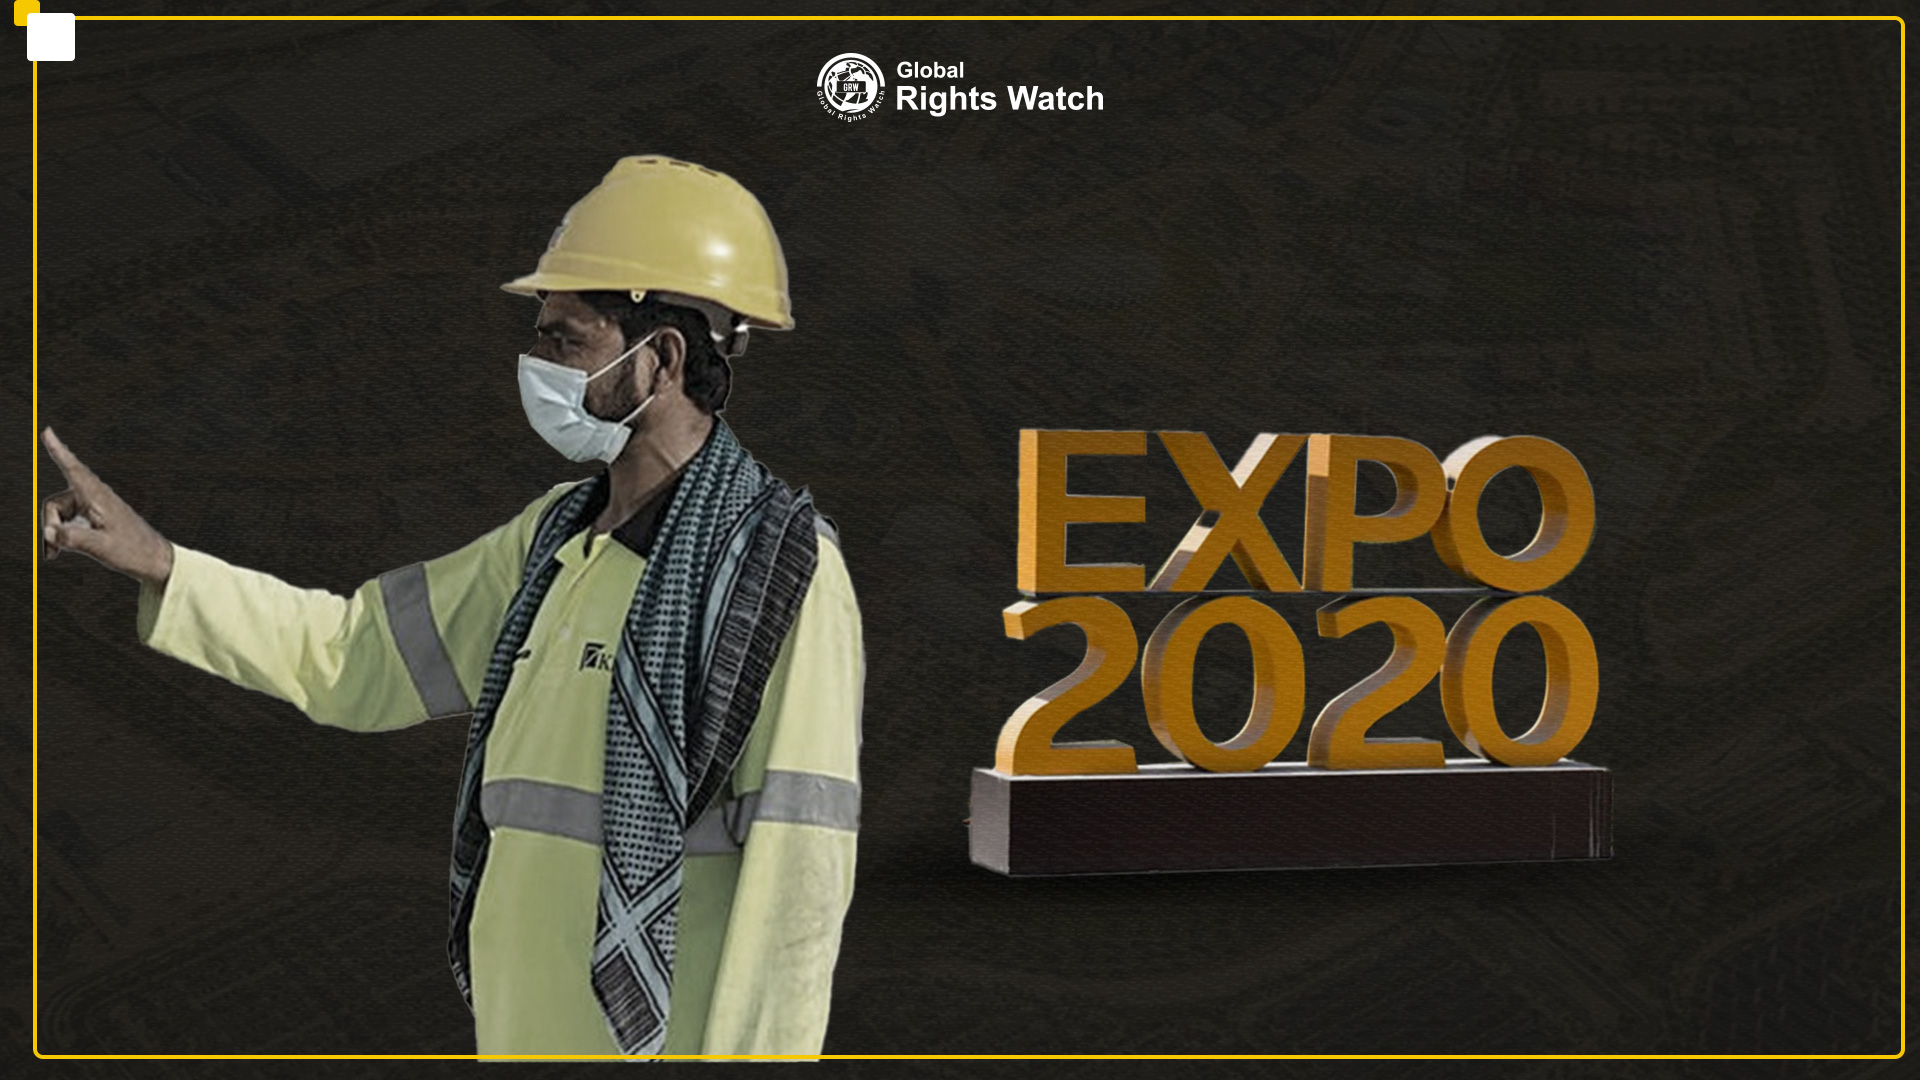 Associated Press Reveals Violations of Workers' Rights at the Expo 2020 Dubai